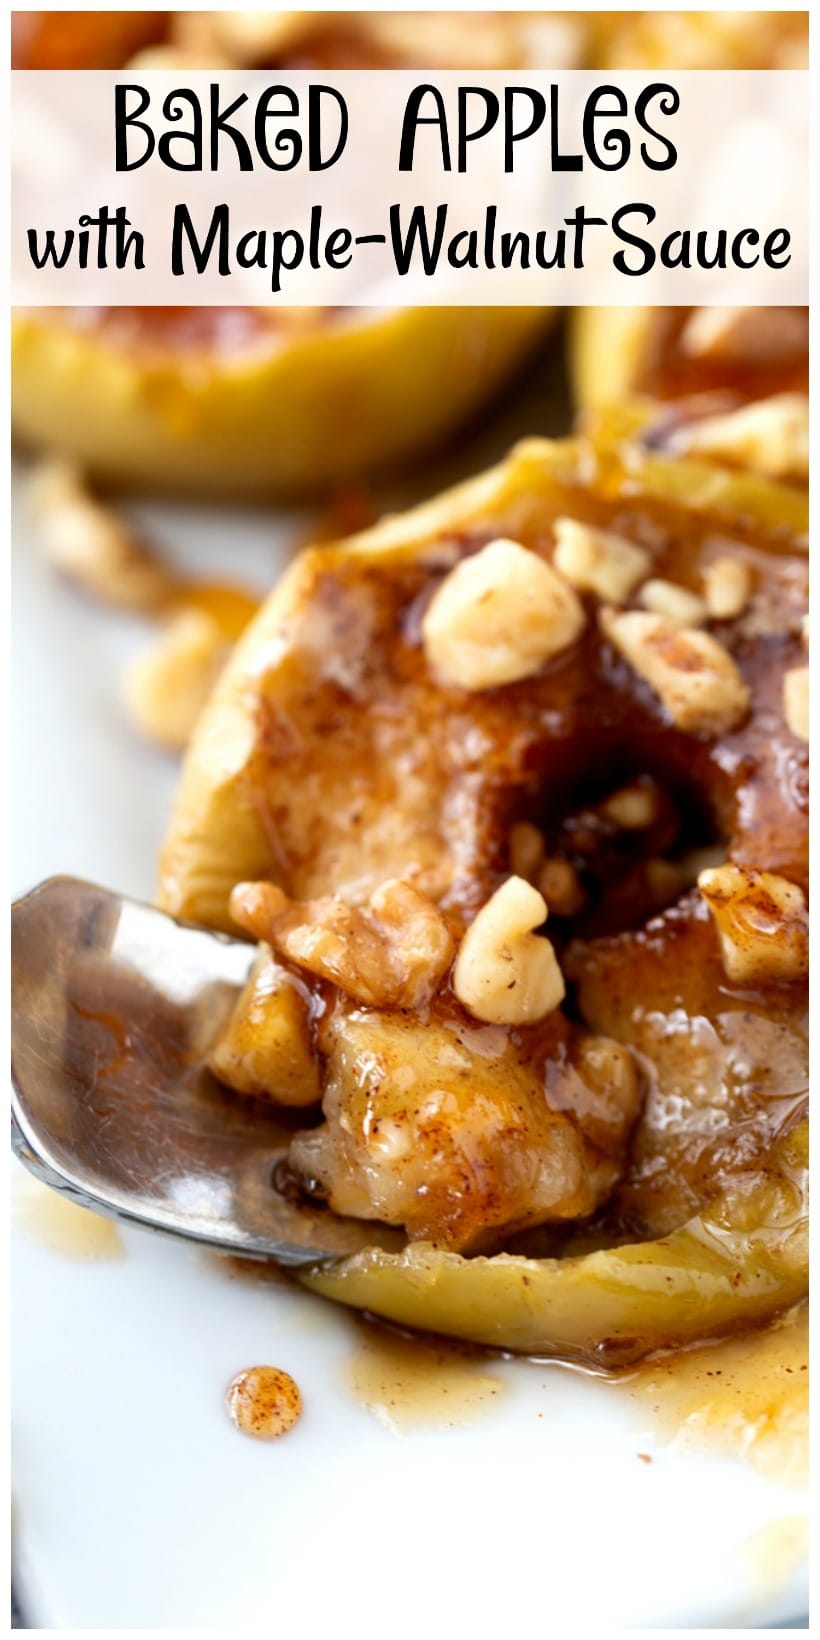 Baked Apples with Maple-Walnut Sauce is essentially apple pie without all the fuss. This baked apples recipe will have you looking forward to apple season every year. via @cmpollak1